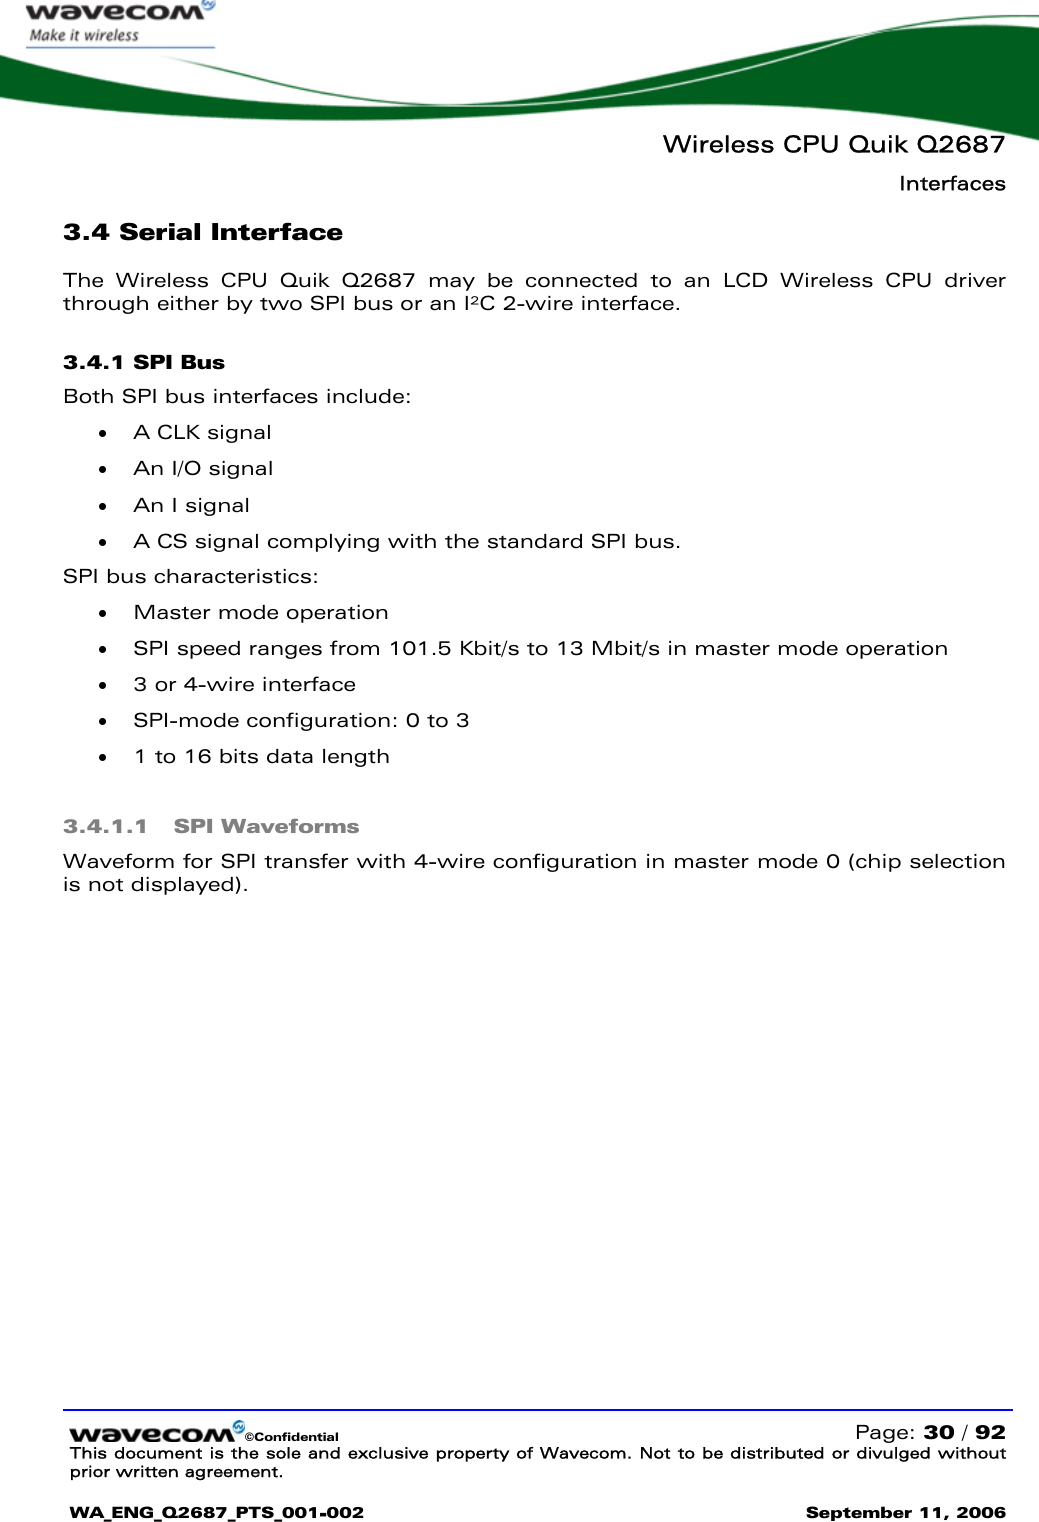   Wireless CPU Quik Q2687 Interfaces   ©Confidential   Page: 30 / 92 This document is the sole and exclusive property of Wavecom. Not to be distributed or divulged without prior written agreement.  WA_ENG_Q2687_PTS_001-002 September 11, 2006   3.4 Serial Interface The Wireless CPU Quik Q2687 may be connected to an LCD Wireless CPU driver through either by two SPI bus or an I²C 2-wire interface. 3.4.1 SPI Bus  Both SPI bus interfaces include: • A CLK signal • An I/O signal • An I signal  • A CS signal complying with the standard SPI bus.  SPI bus characteristics: • Master mode operation • SPI speed ranges from 101.5 Kbit/s to 13 Mbit/s in master mode operation • 3 or 4-wire interface • SPI-mode configuration: 0 to 3 • 1 to 16 bits data length 3.4.1.1 SPI Waveforms Waveform for SPI transfer with 4-wire configuration in master mode 0 (chip selection is not displayed). 